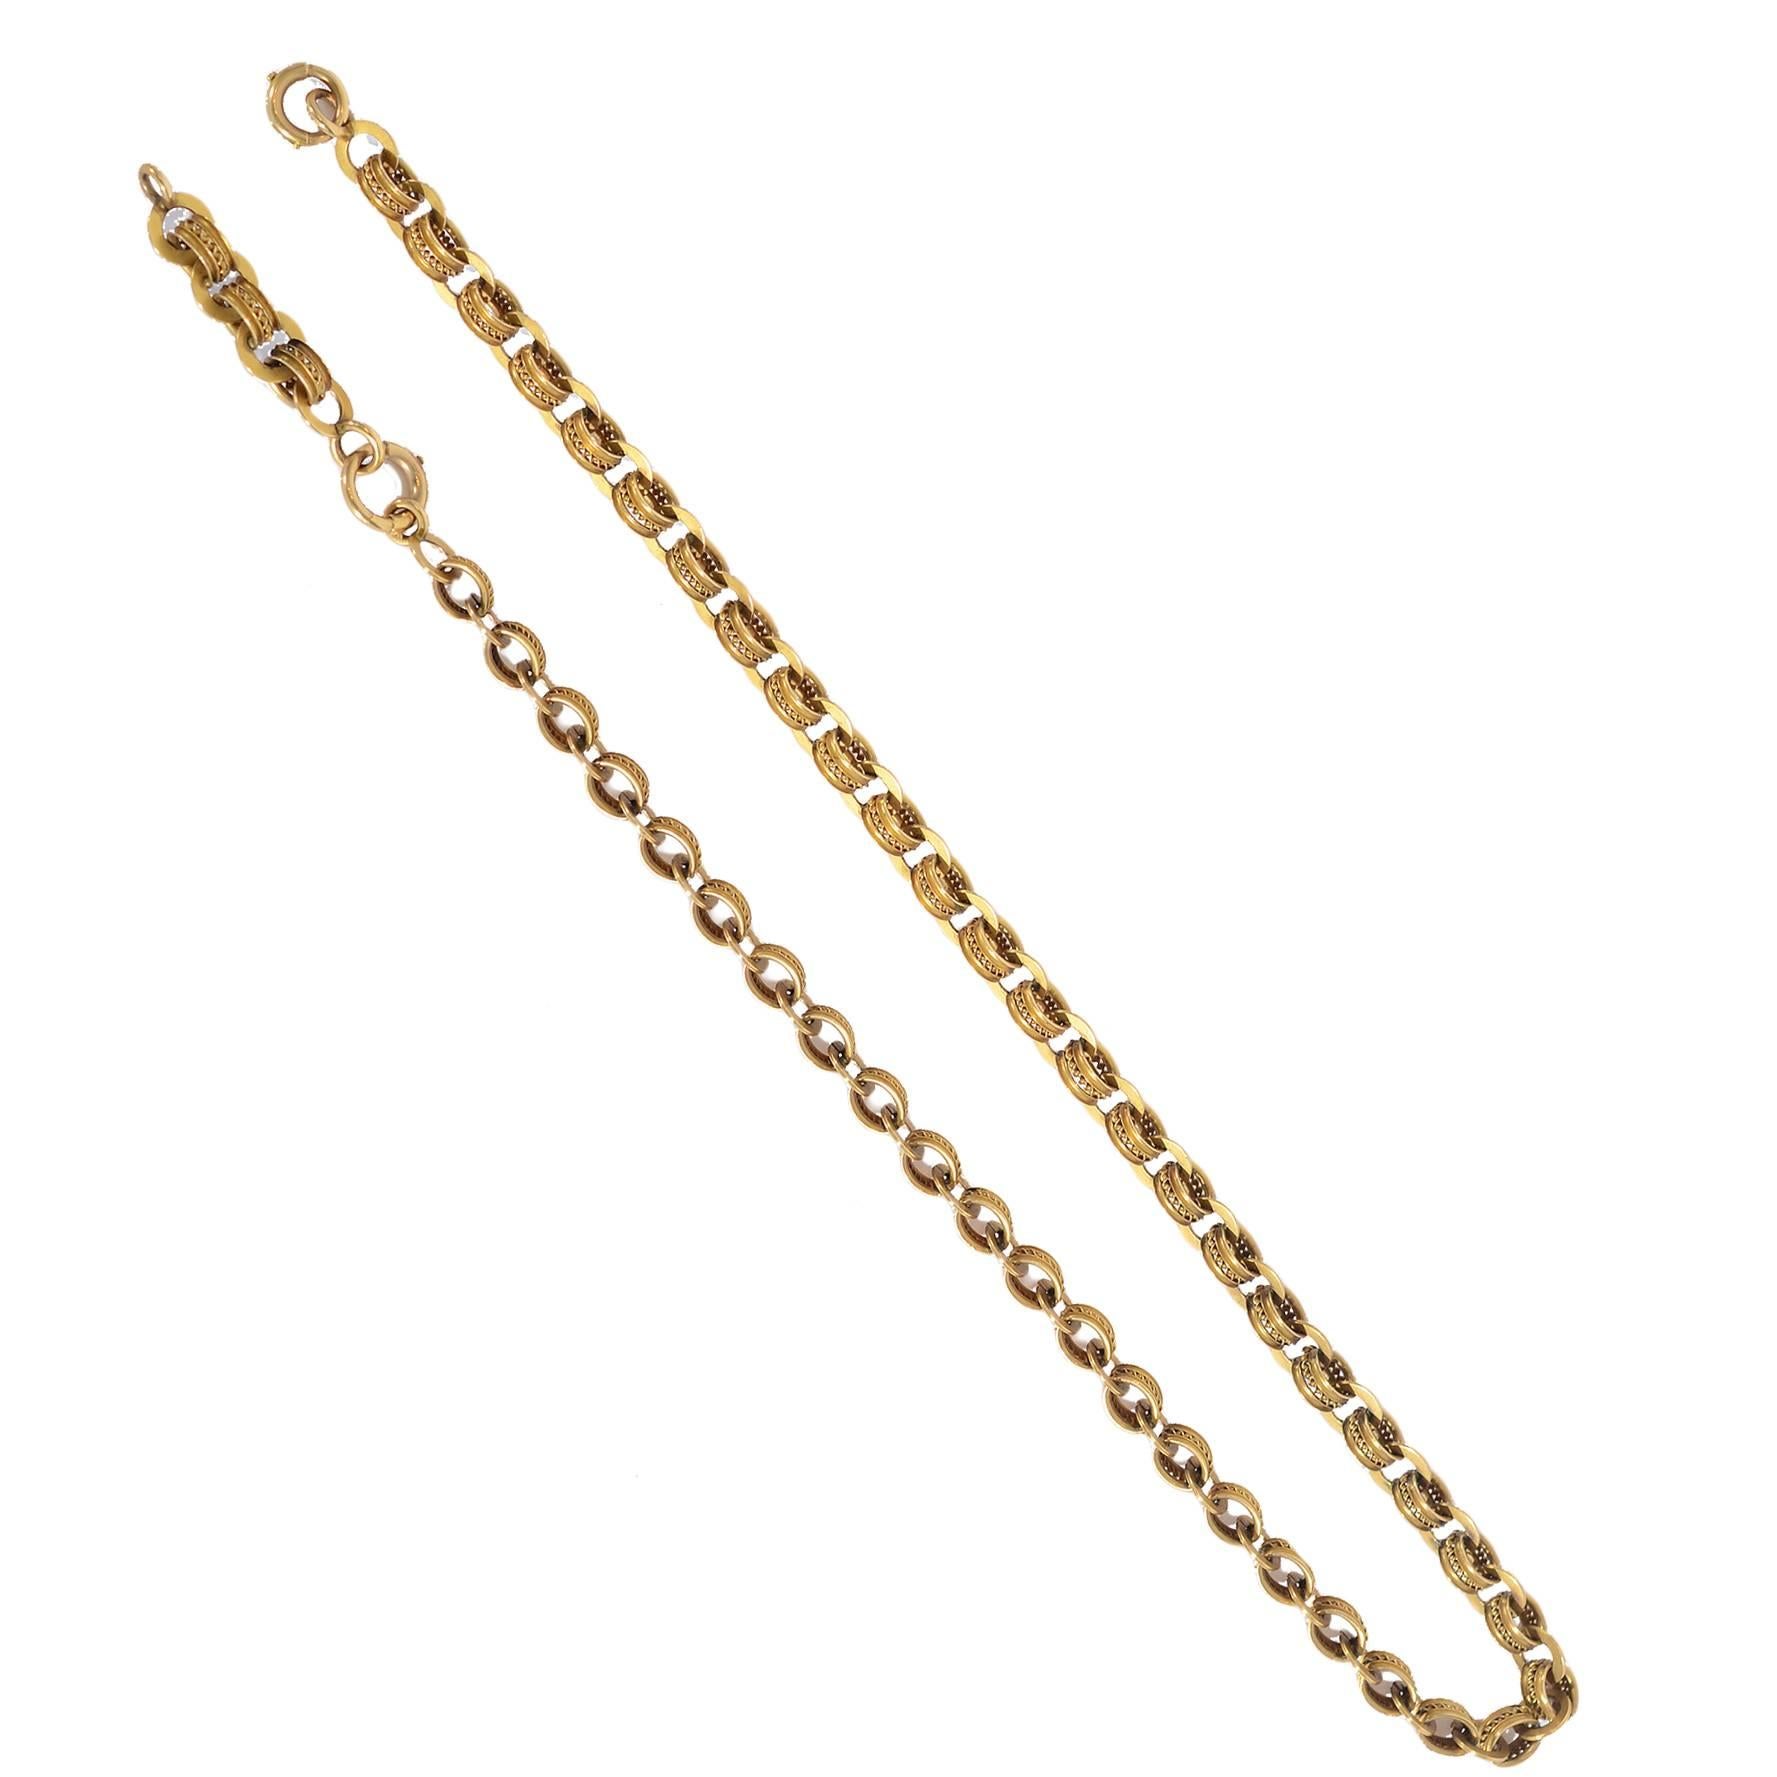 Handmade Victorian Gold Chain Necklace